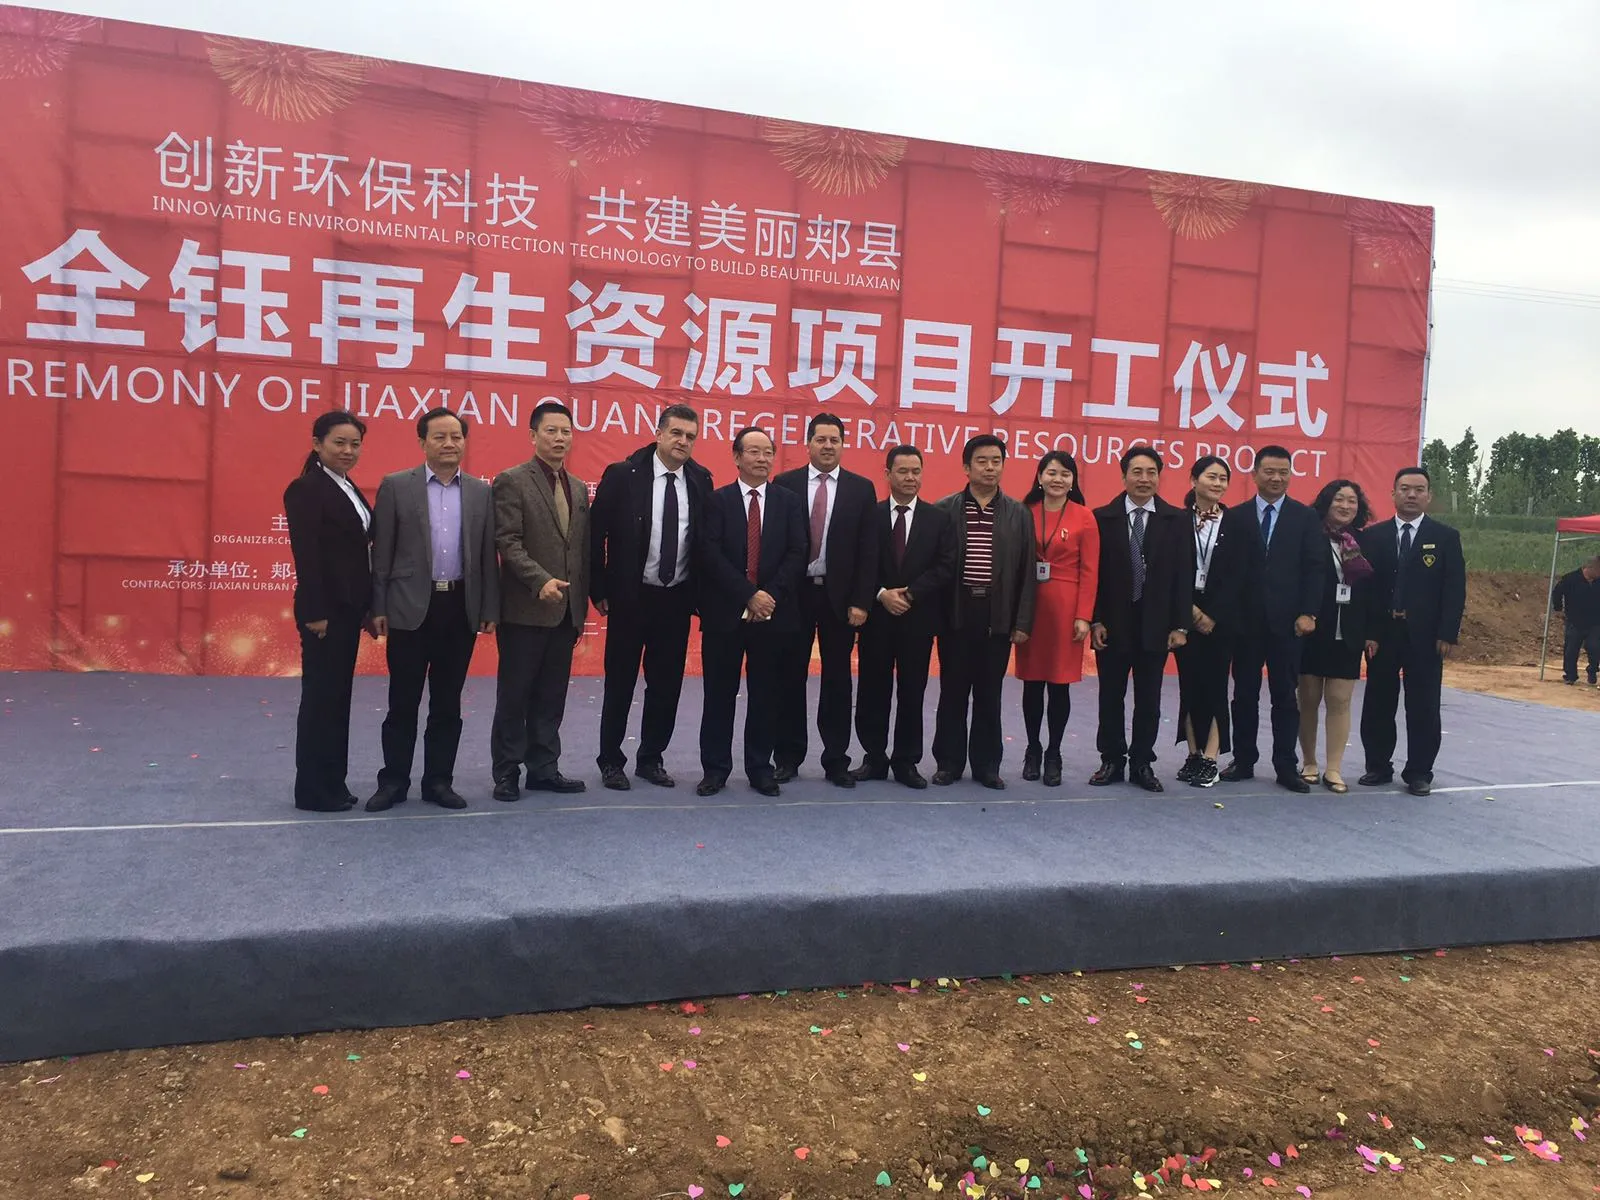 You are currently viewing Ground-breaking ceremony for the first plant in Jiaxiang, Henan Province.